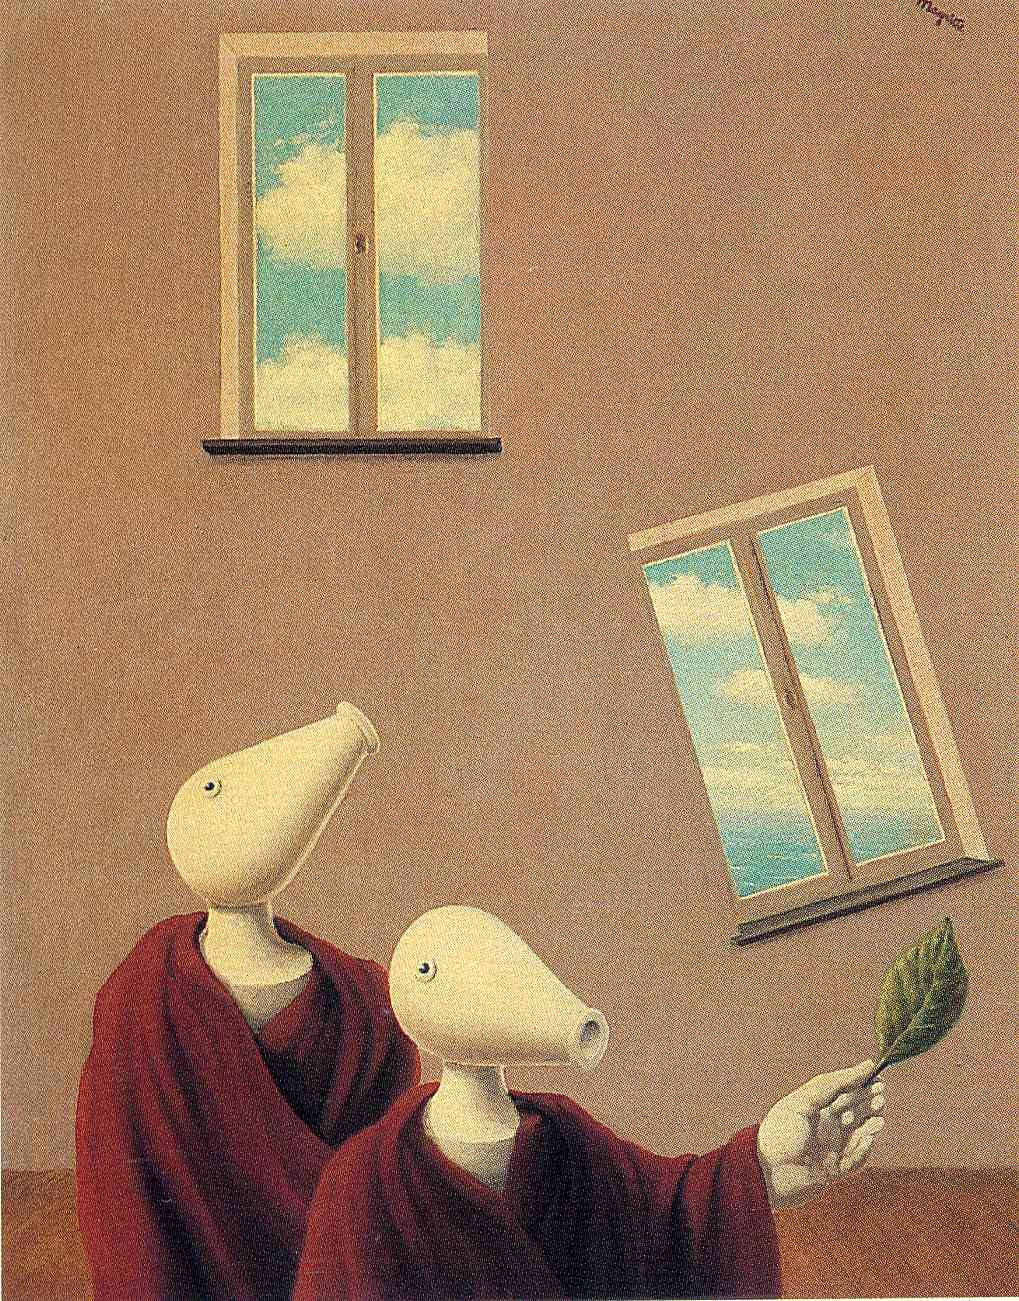 Natural encounters, 1945
Rene Magritte